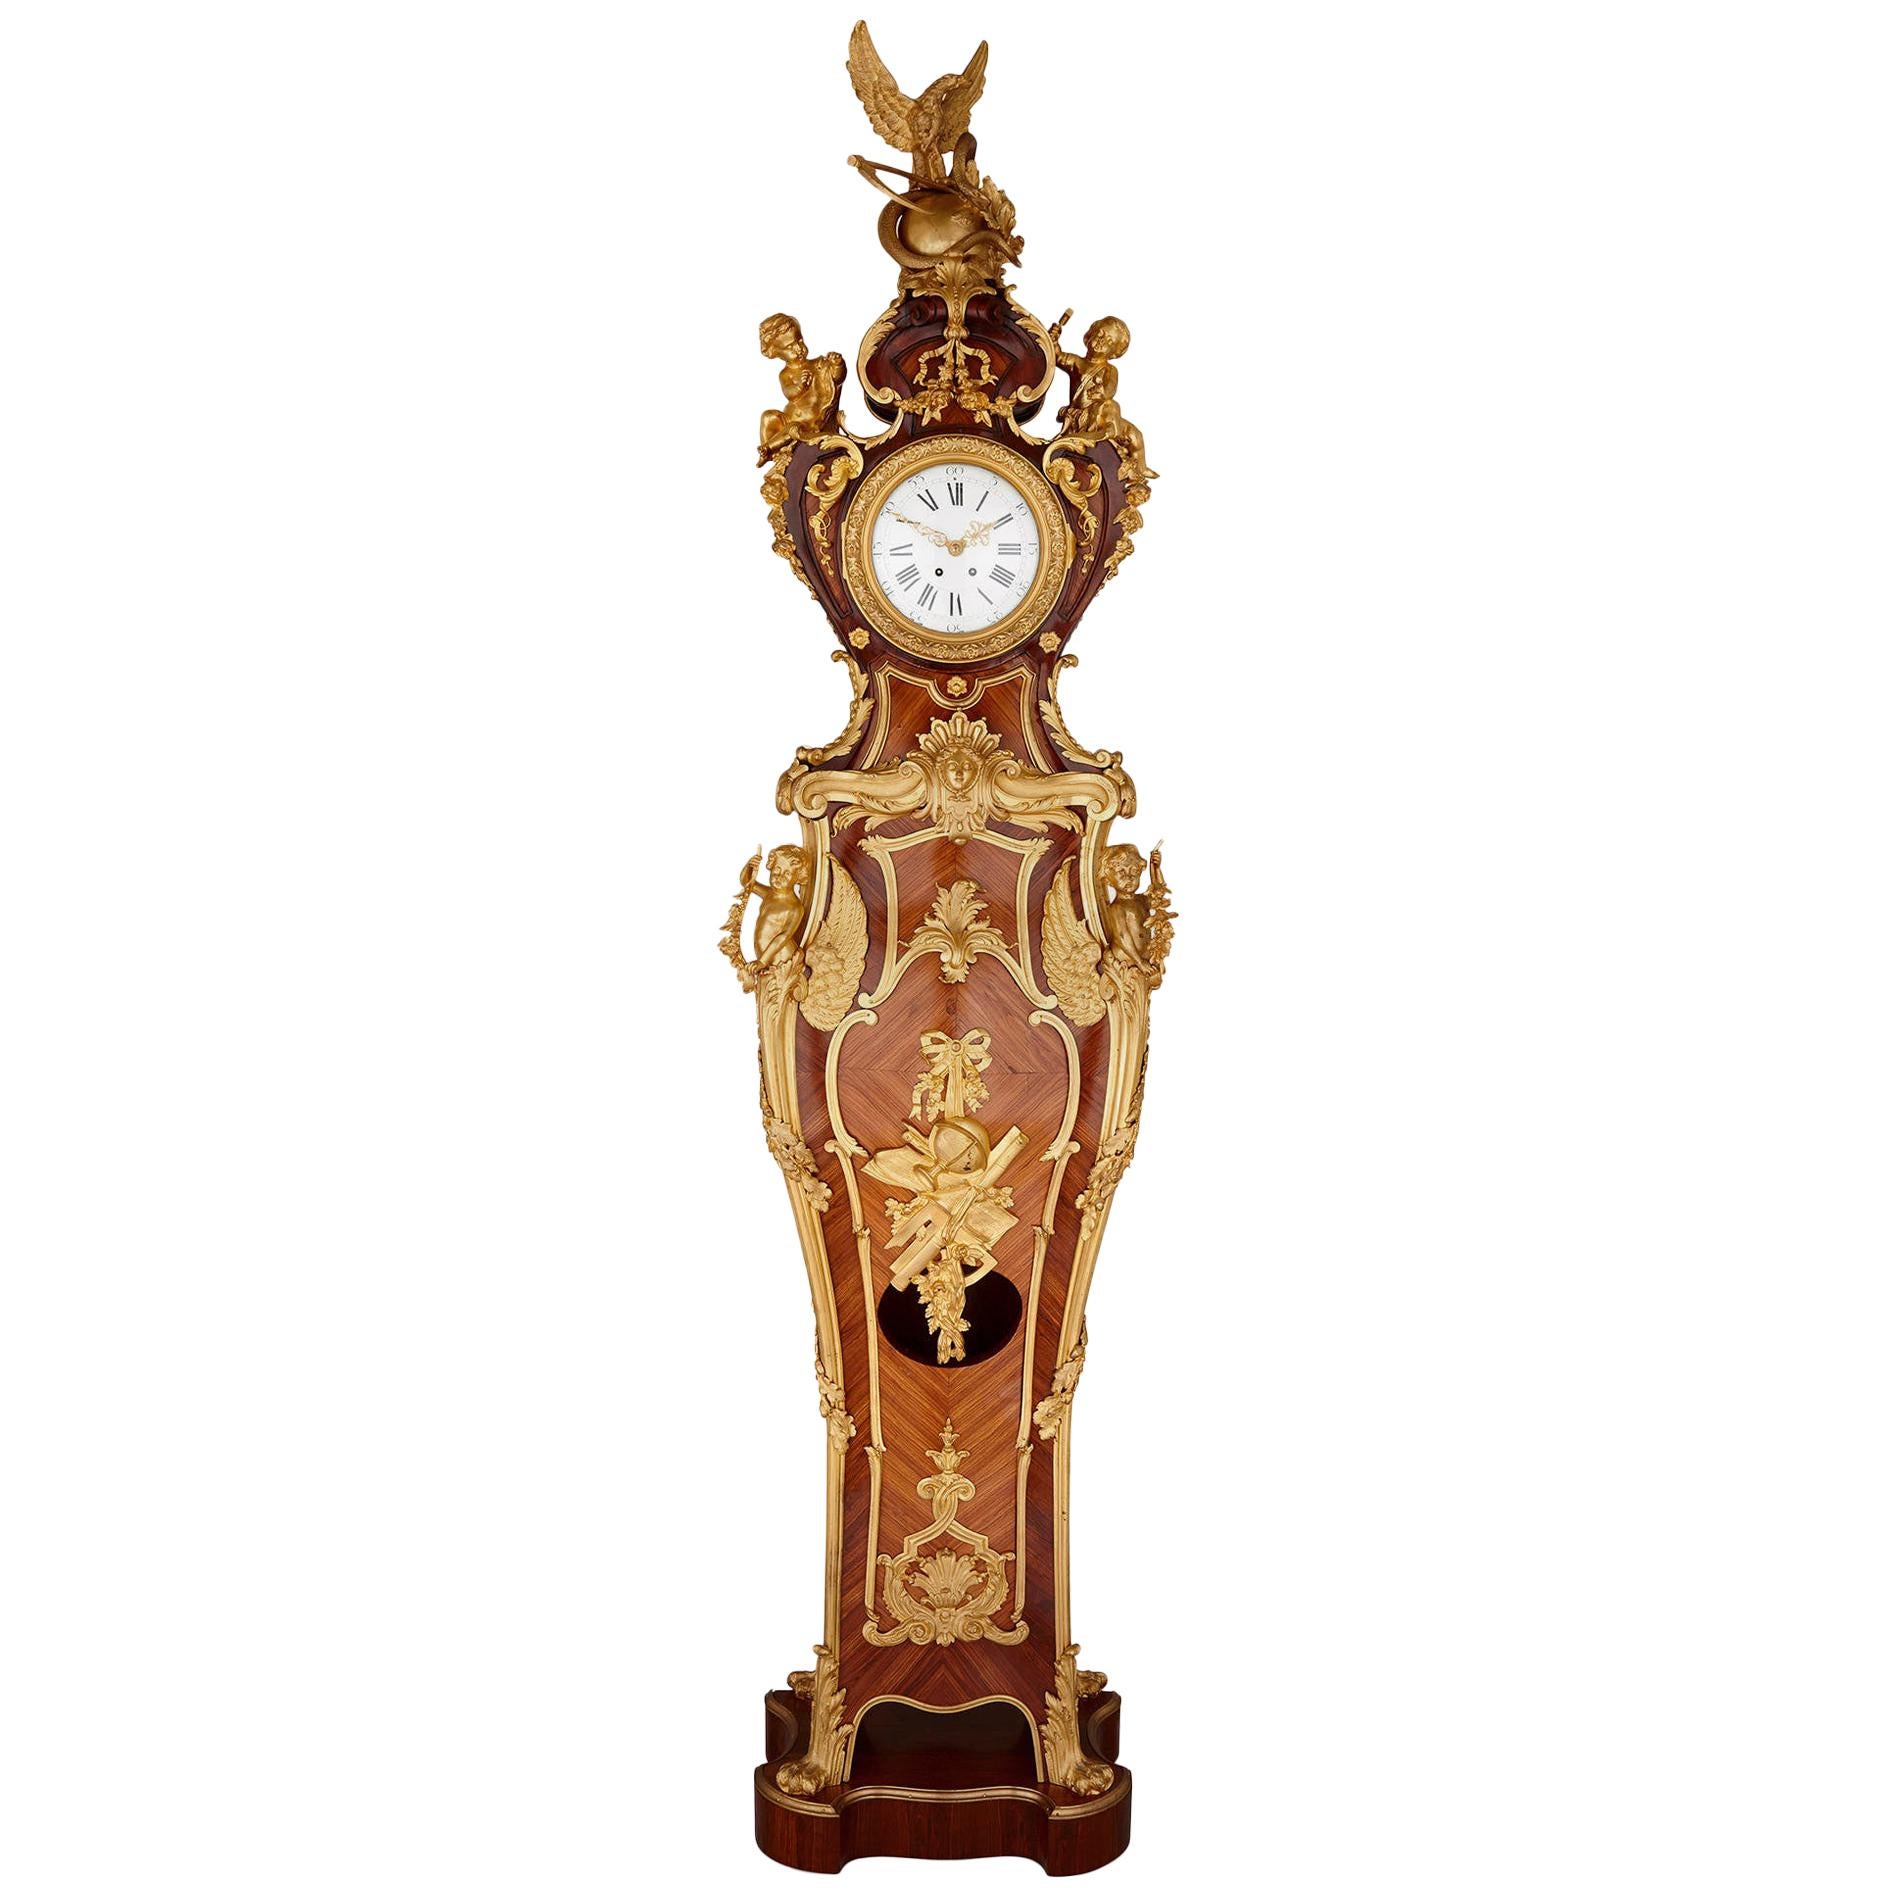 Gilt Bronze and Parquetry Standing Clock by Kahn in the Régence Style